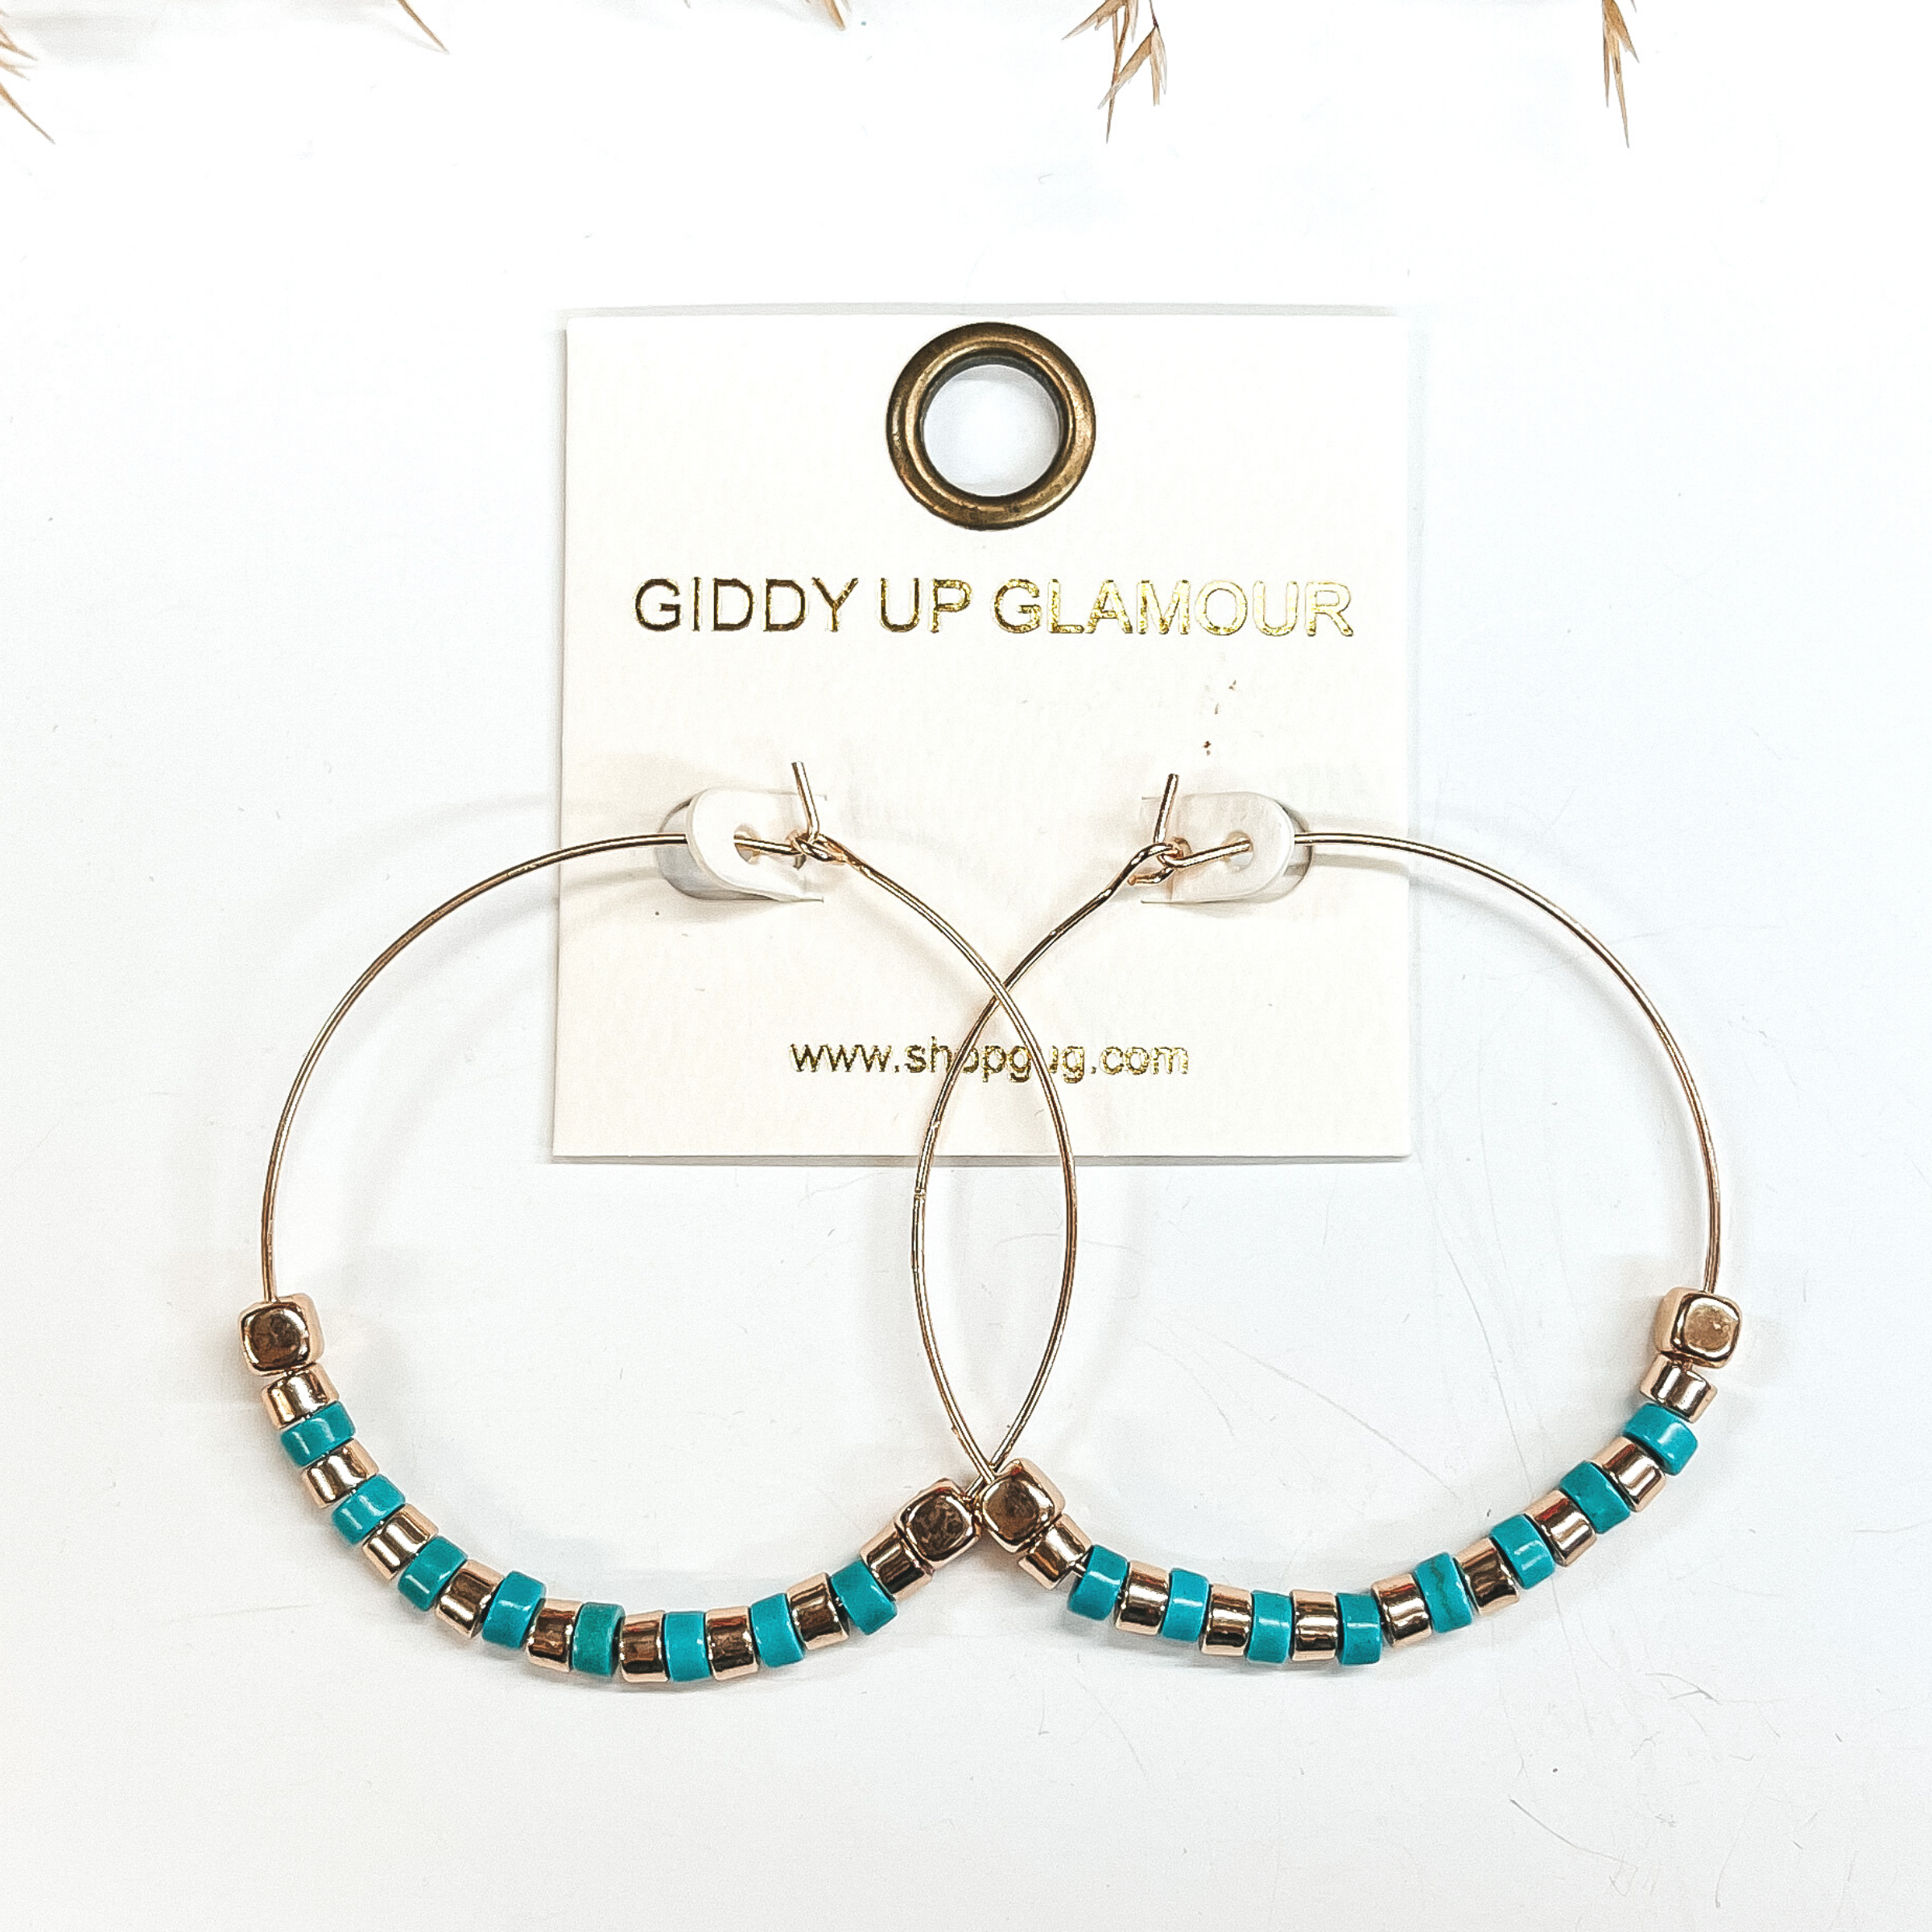 Gold hoops with gold and turquoise beads, on each end  there is a gold square bead. Taken on a white  background with a brown plant in the back as decor.